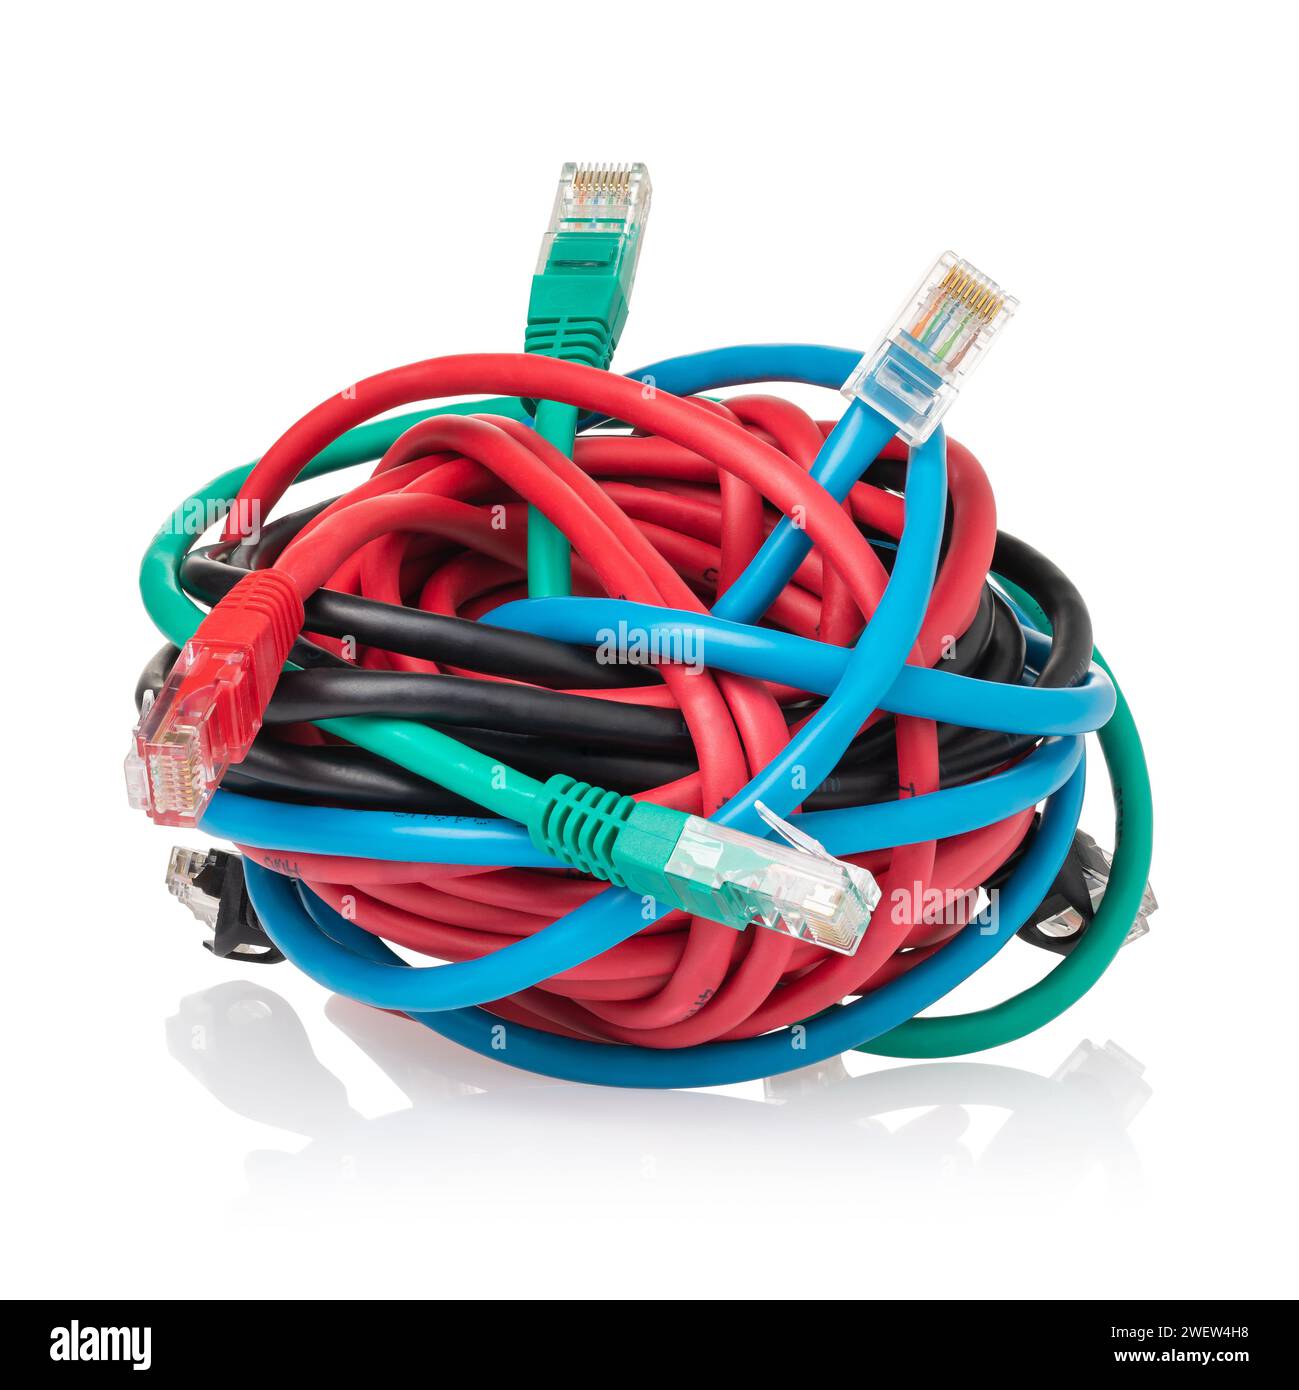 Pile of multi-colored computer patch wires tangled together isolated on a white background Stock Photo